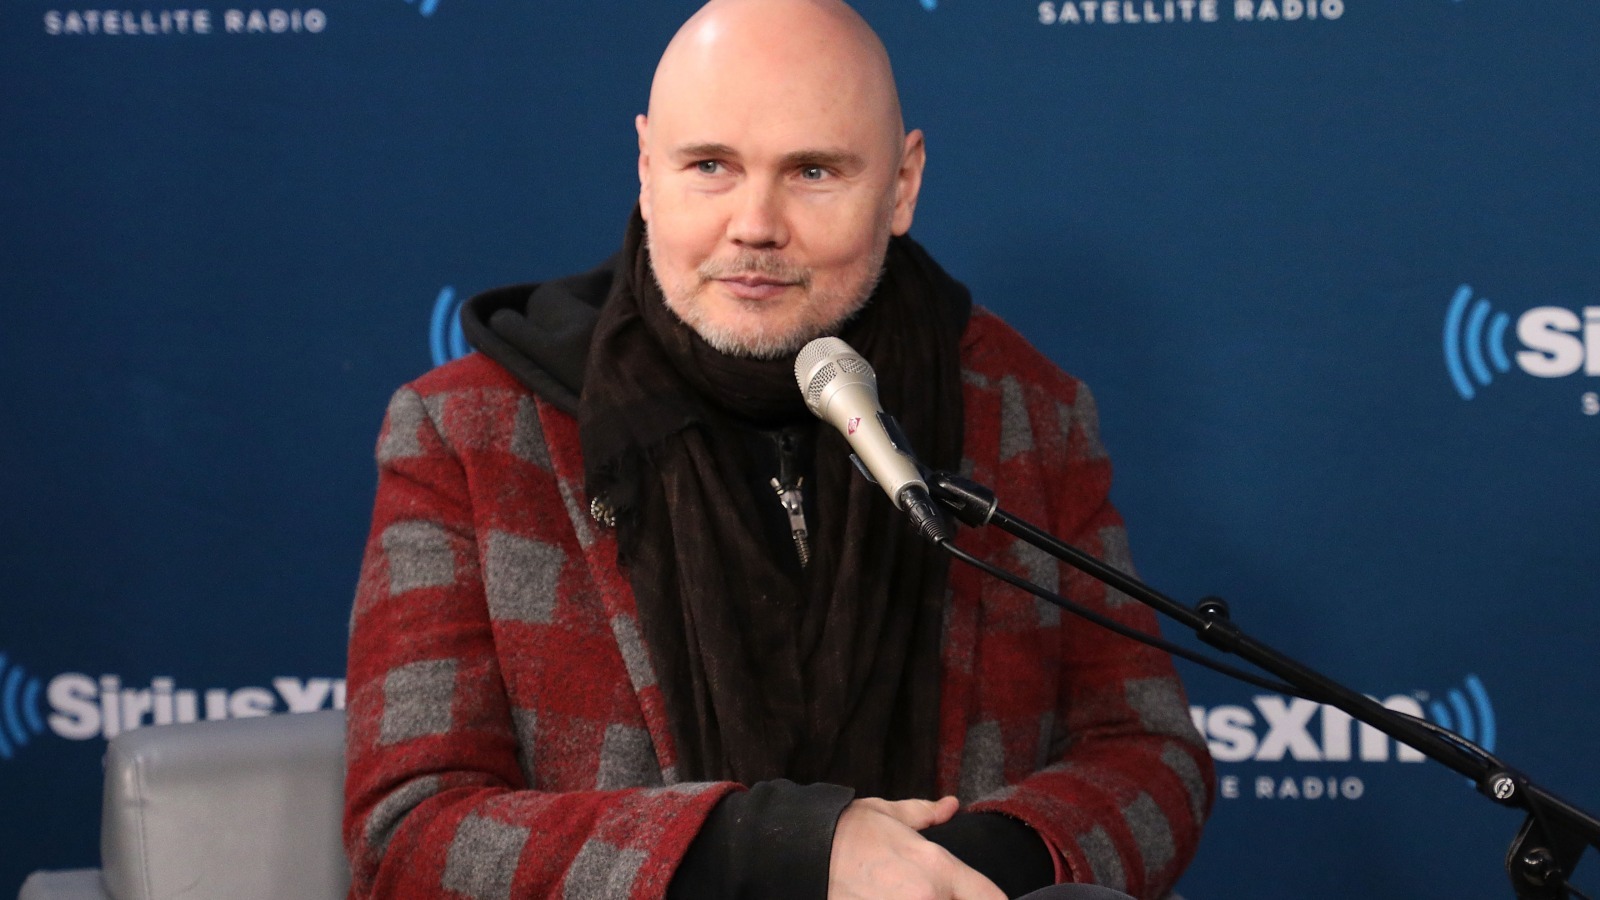 NWA Owner Billy Corgan Responds To Negative Comments Made By Dave Meltzer